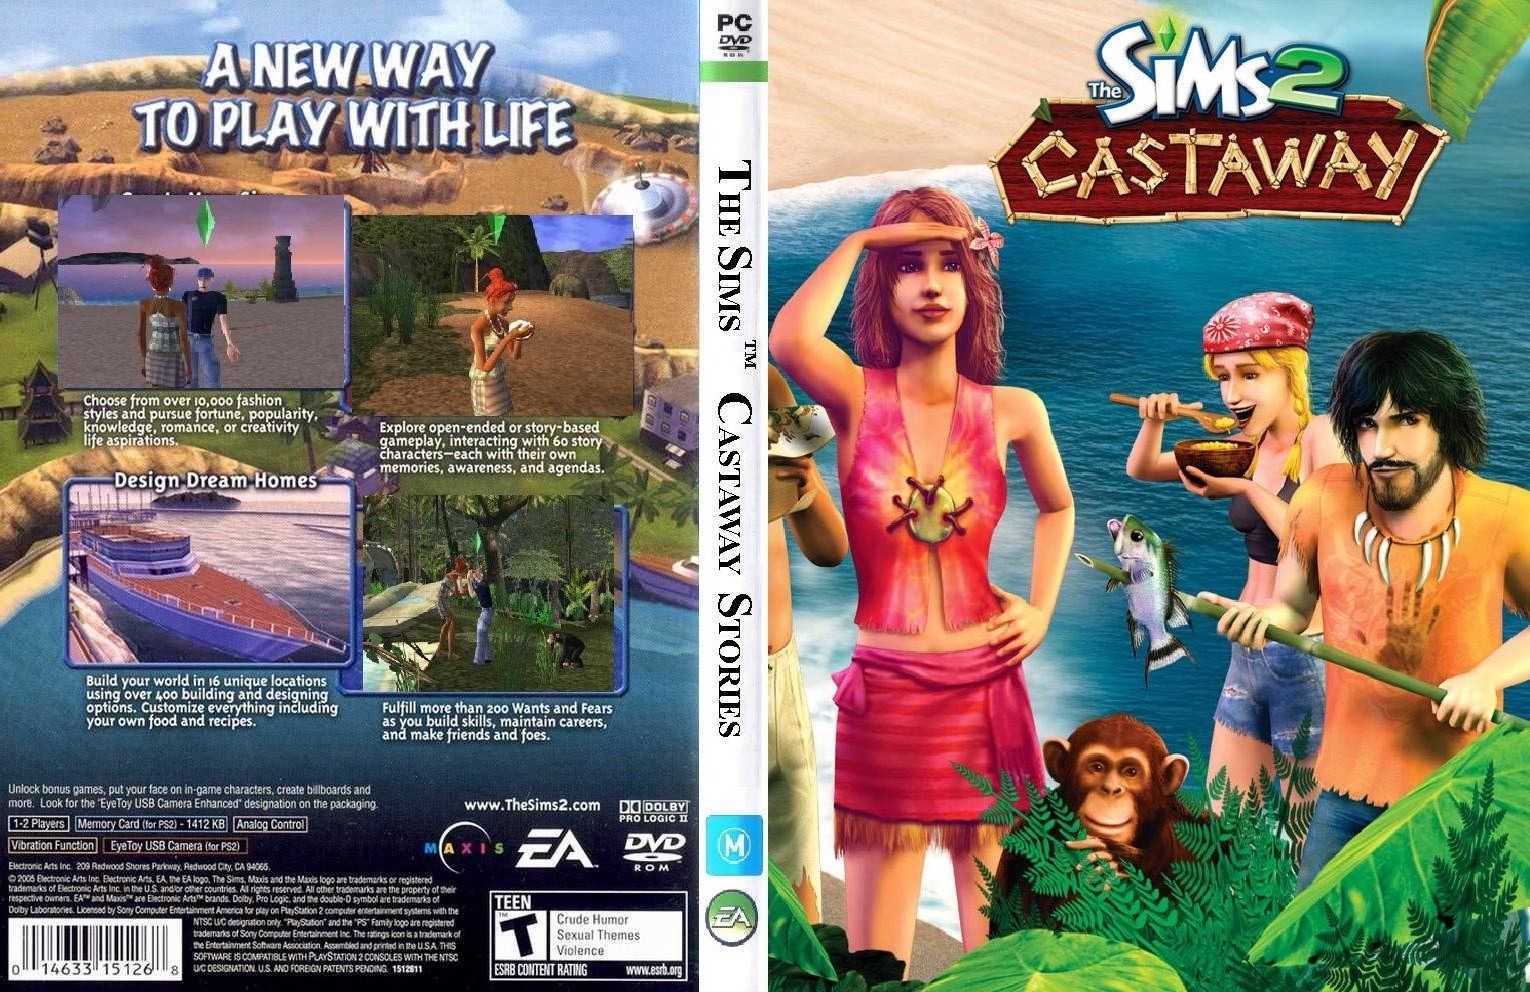 the sims castaway pc game